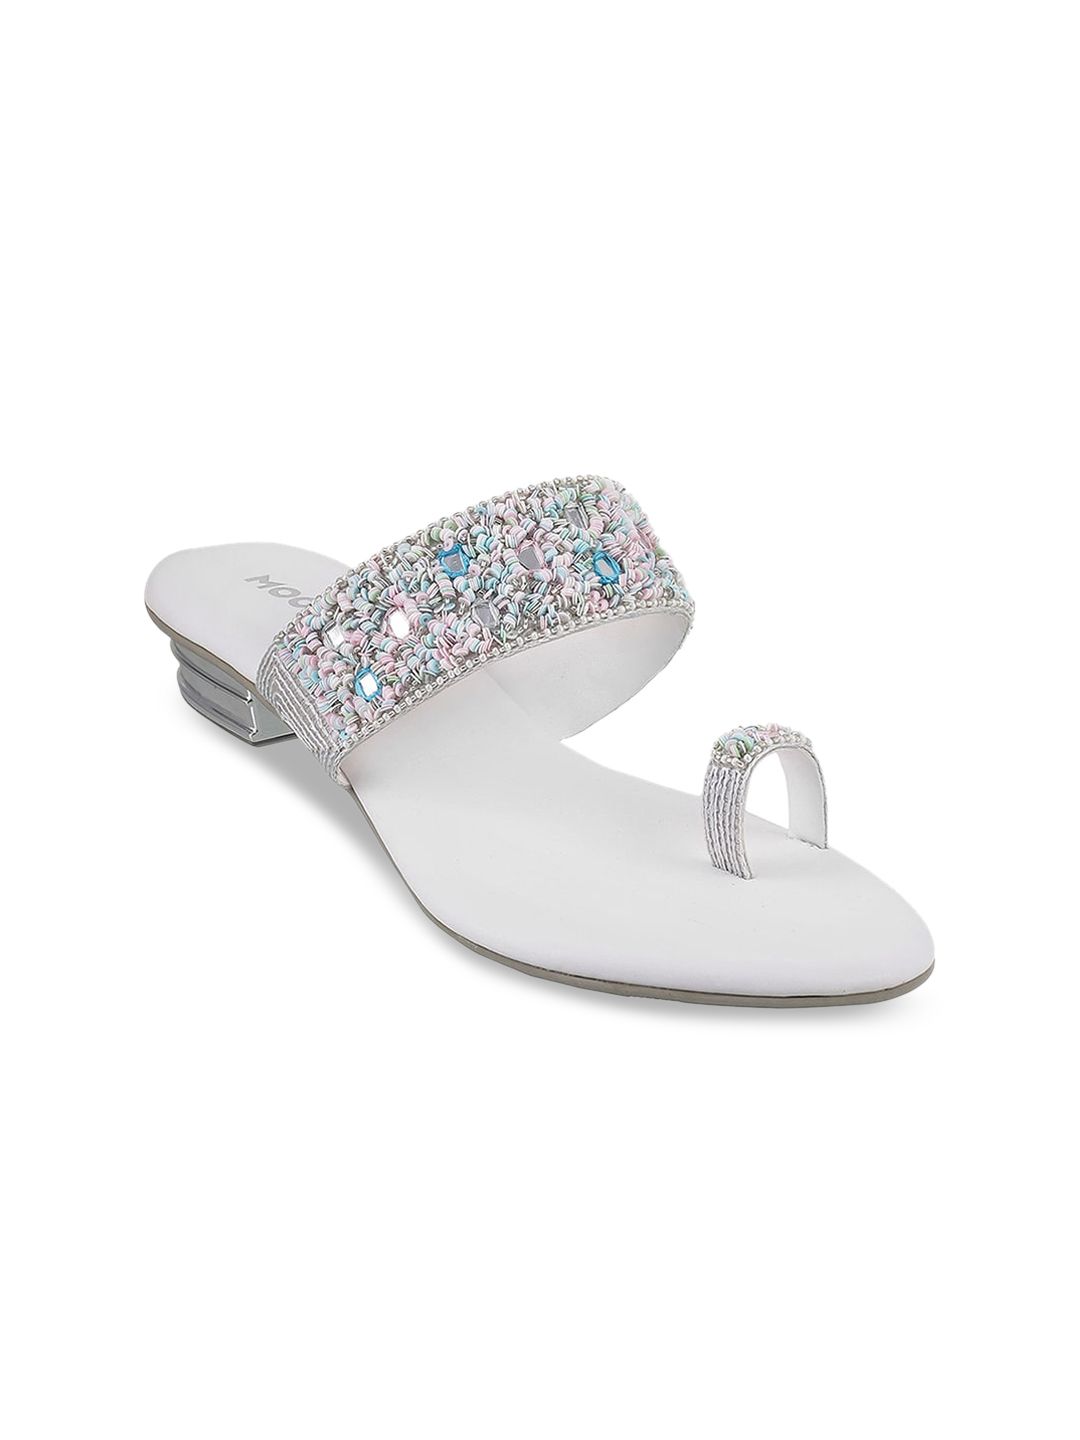 Mochi White Embellished Block Sandals Price in India